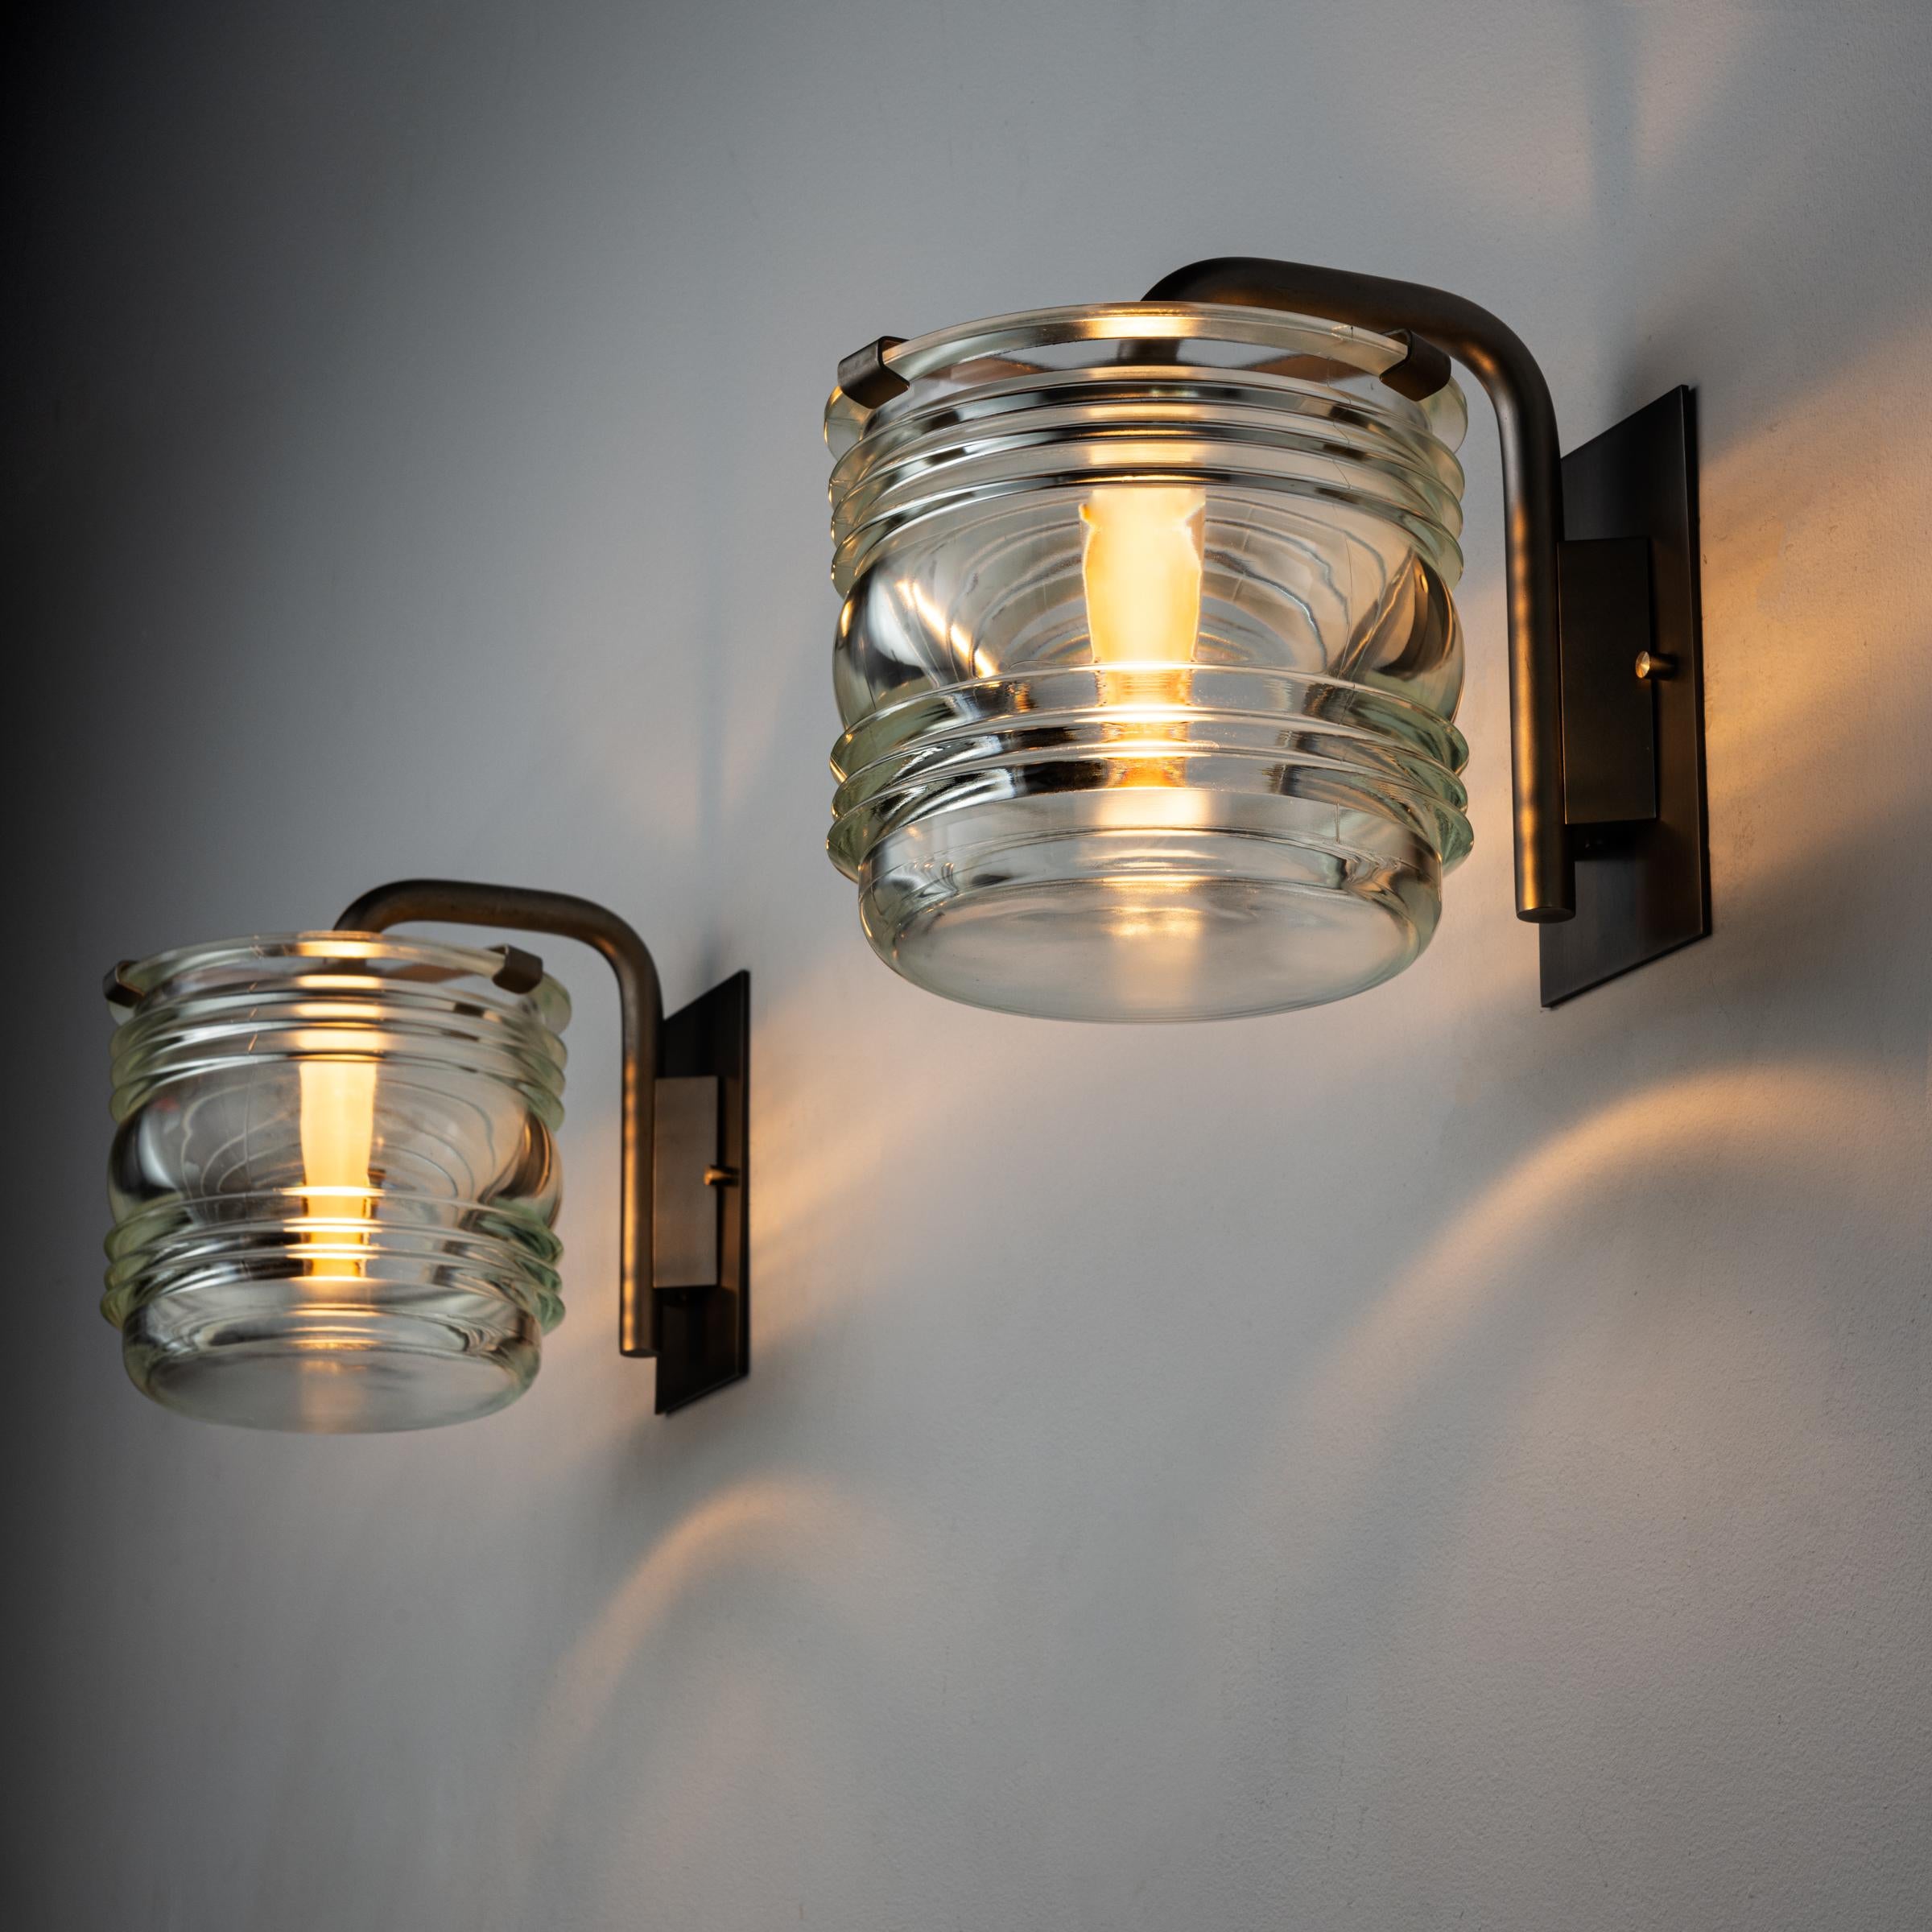 Four Sconces by Candle. Designed and manufactured in Italy, circa 1950's. Glass, brass Wired for U.S. standards. Custom brass backplates. Lamping: Allow 1 qty 120v E27 Socket with 75w Frosted bulb. Light bulbs not included. PRICED AND SOLD